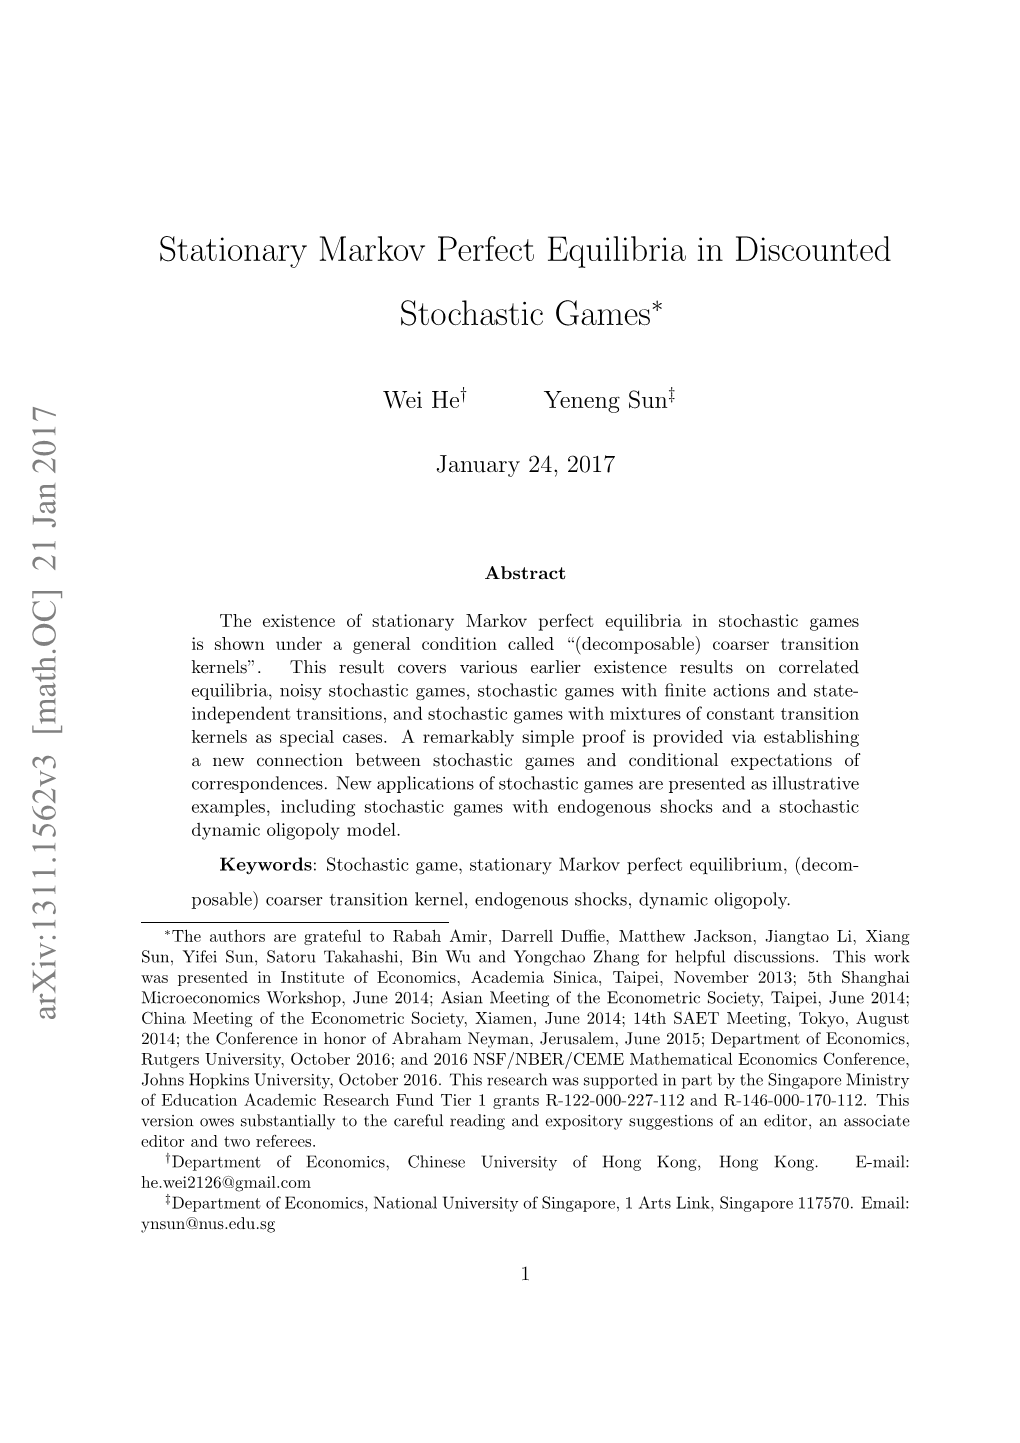 Stationary Markov Perfect Equilibria in Discounted Stochastic Games Remains an Important Problem